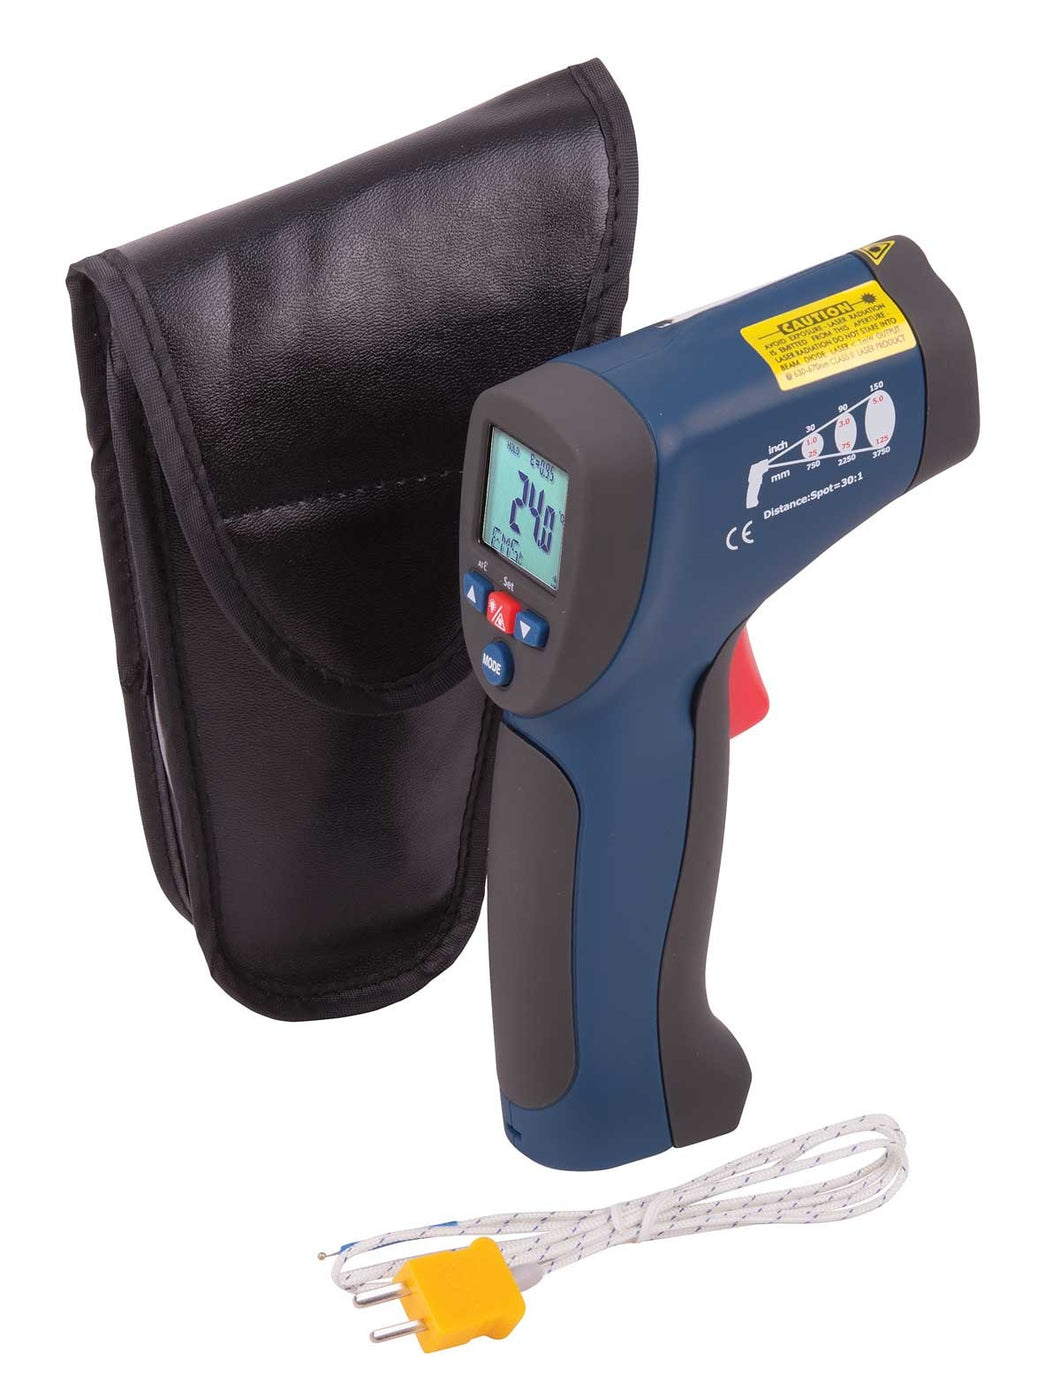 Infrared Thermometer-REED - SERVOXY INC